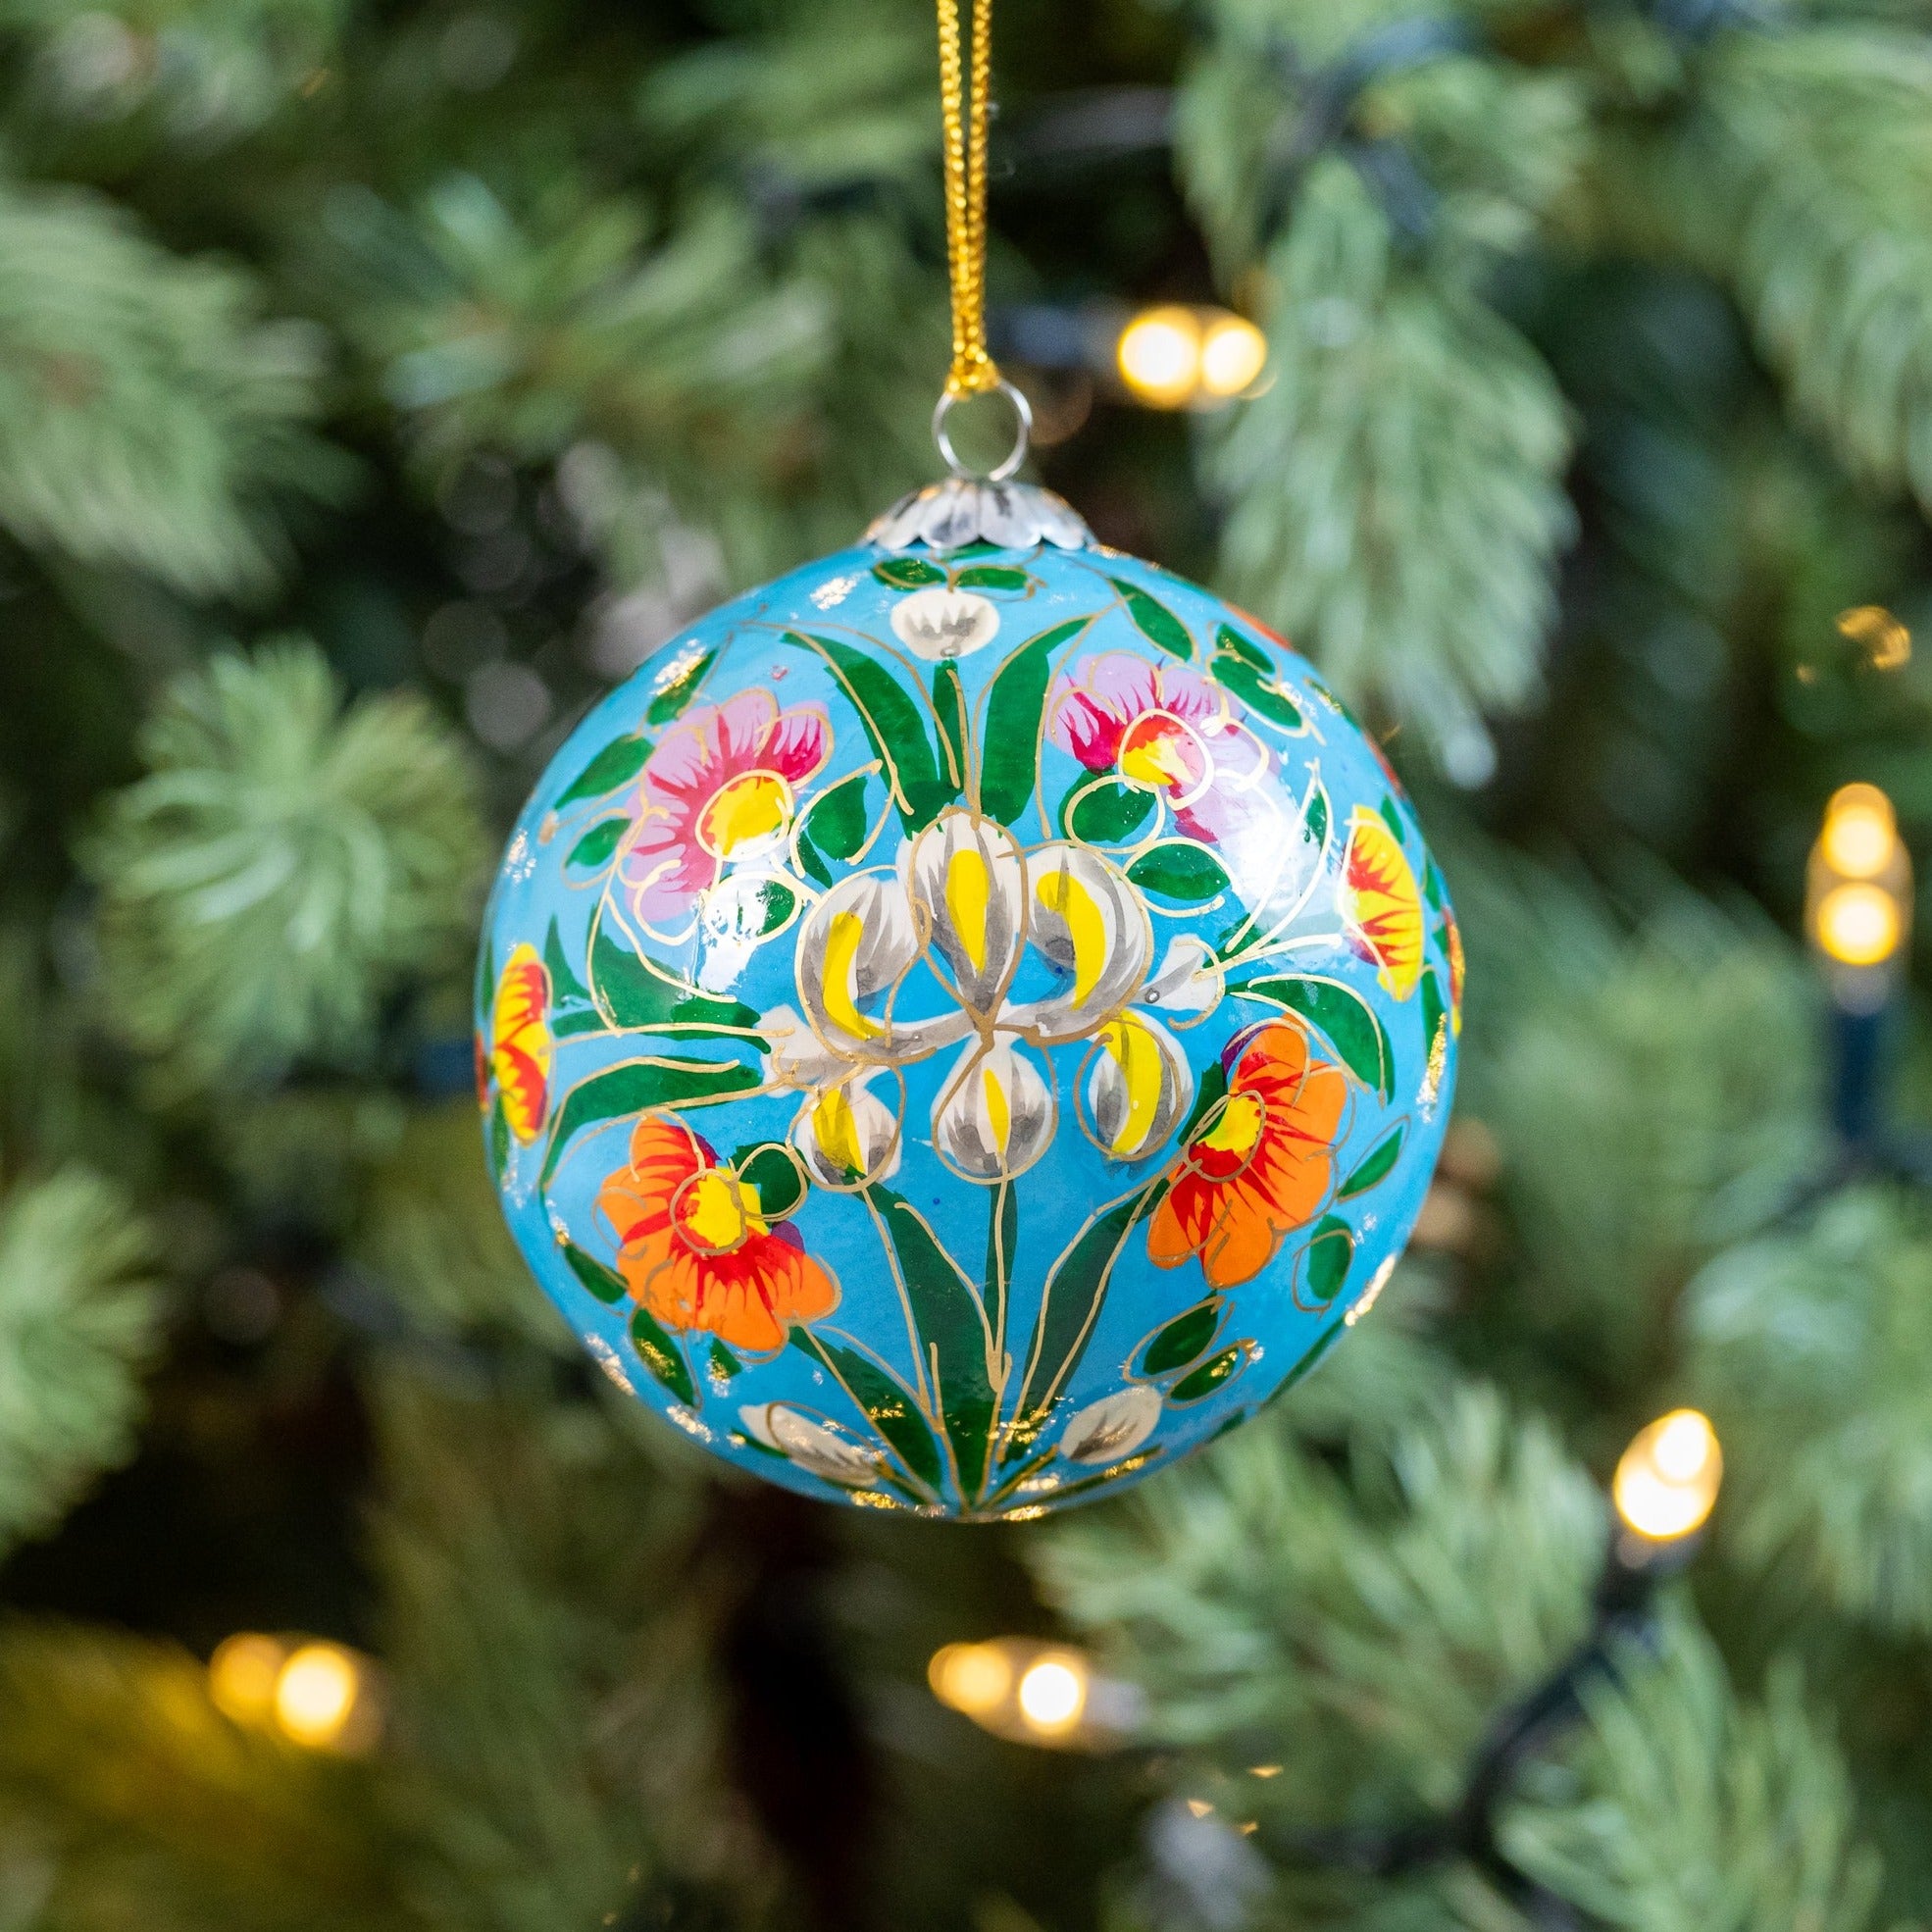 Tulip Heaven Turquoise Hand Painted Christmas Bauble | British Red Cross Shop